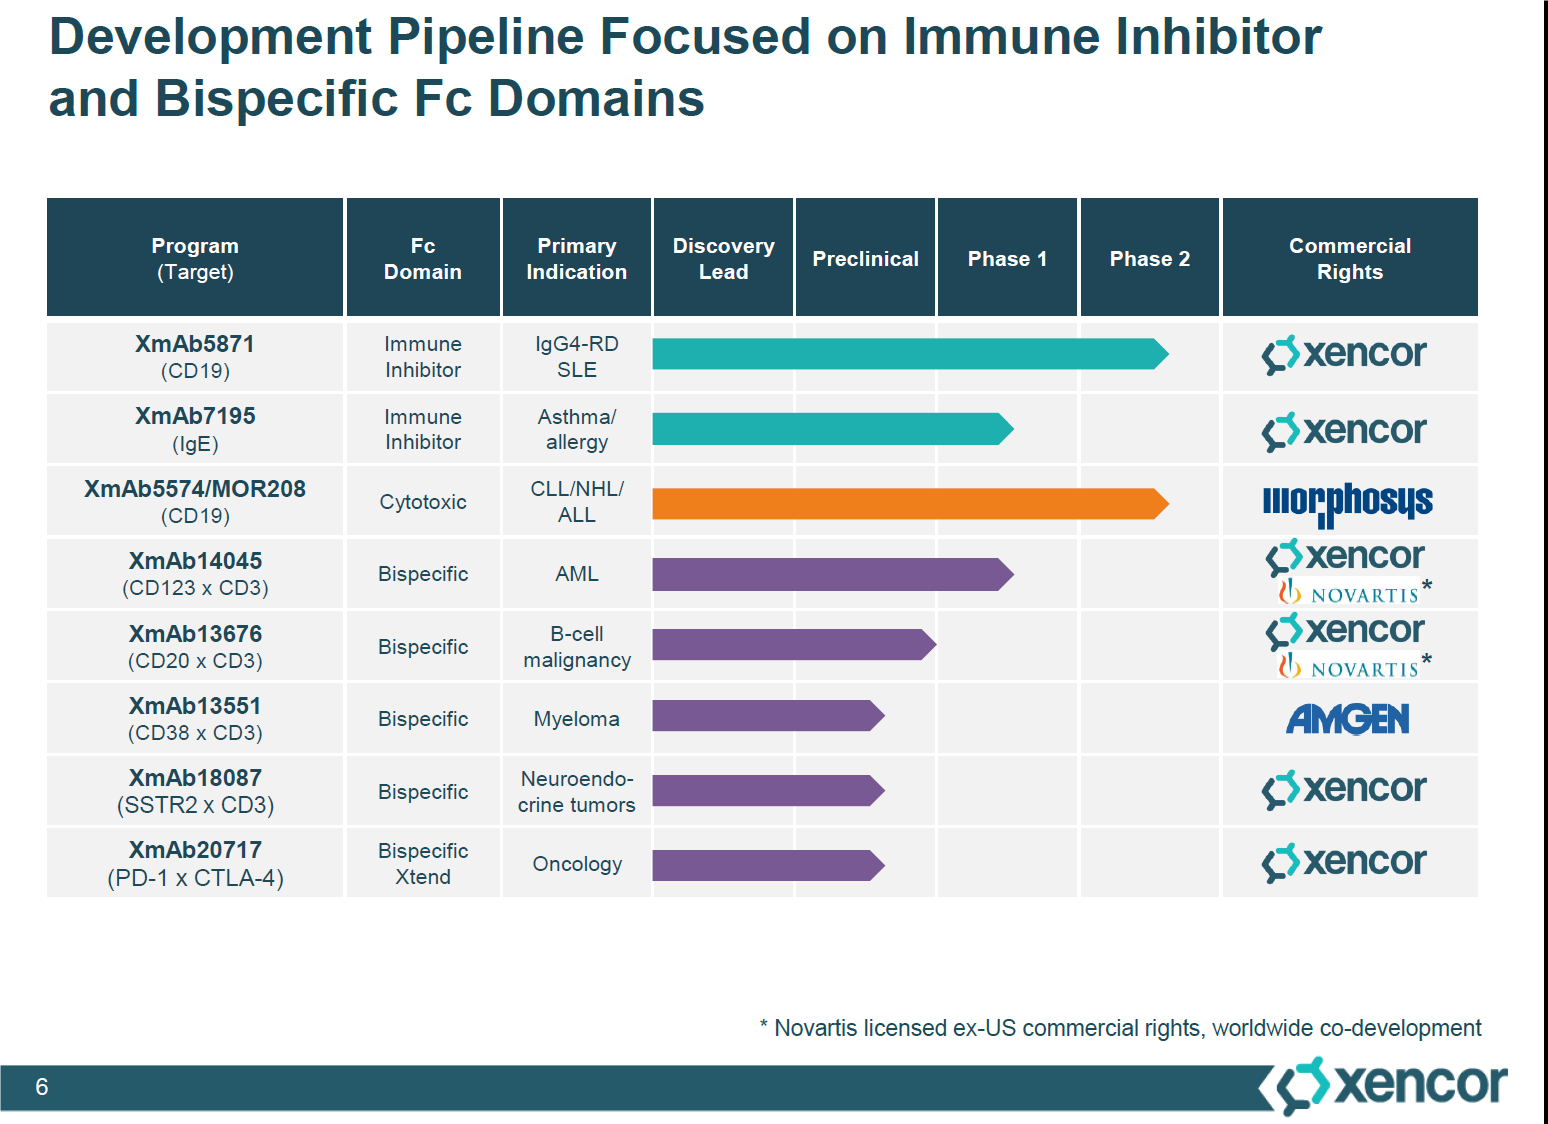 Figure 6. Xencor’s bispecific and immune inhibitor candidates. Outlined is the XmAb14045 and XmAb13676, the bispecific cancer therapies, which have completed their preclinical trials and going into phase 1 studies, in collaboration with Novartis. http://files.shareholder.com/downloads/AMDA-2B2V8N/3484696492x0x897917/43567D57-A3EC-4DAD-9FE0-A5EFA3EEF375/Xencor_Analyst_Day_Presentations.pdf